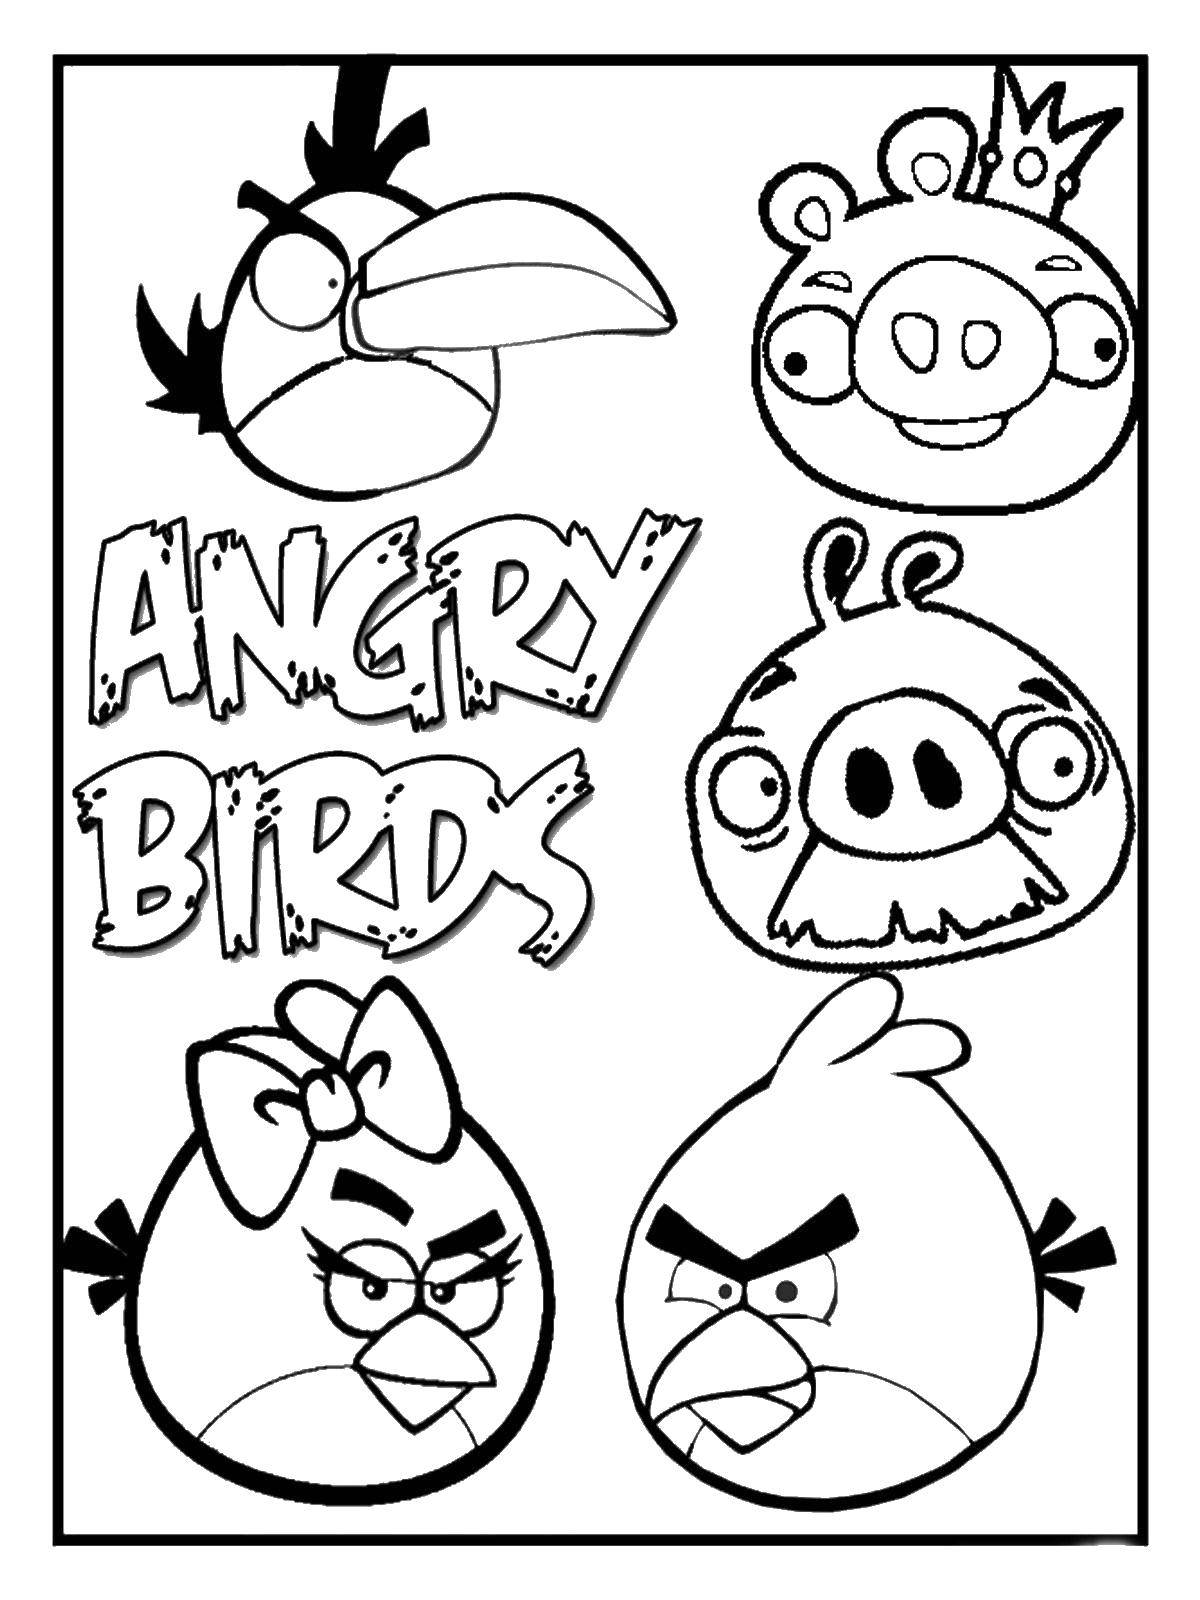 Coloring Angry birds and king pig. Category angry birds. Tags:  angry birds, angry birds.